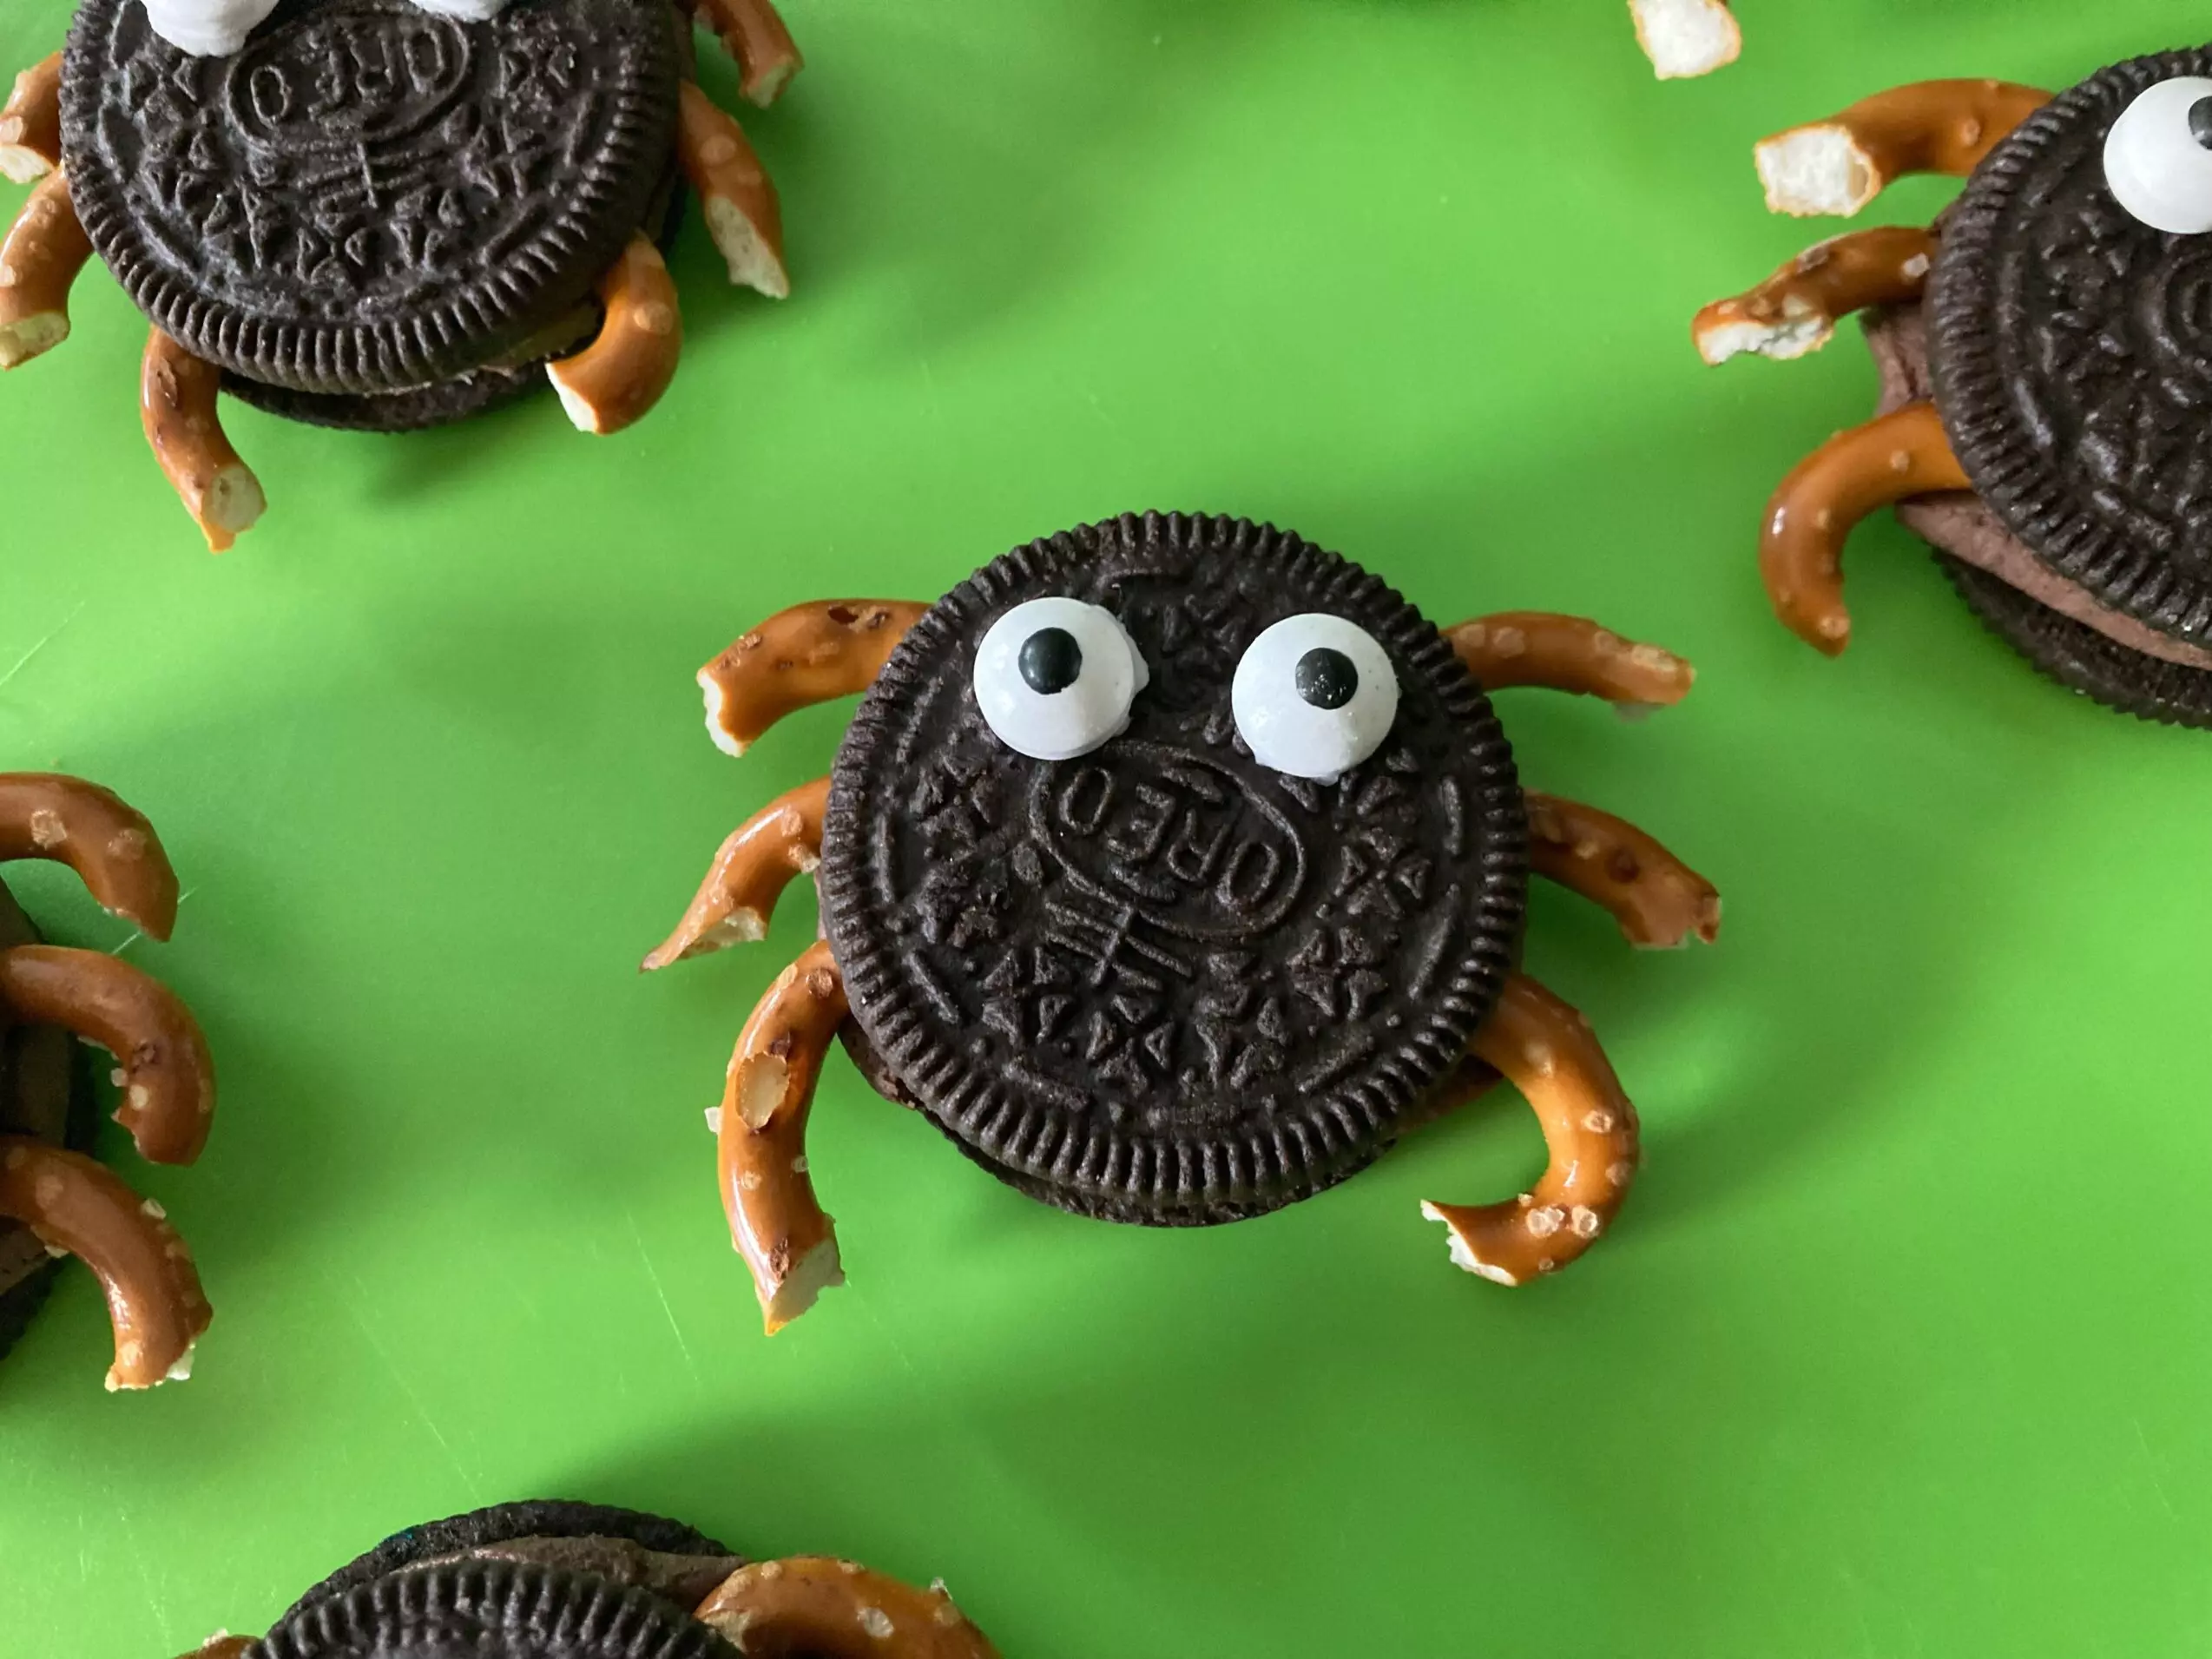 Oreo Spiders from Out of the Box Baking.com